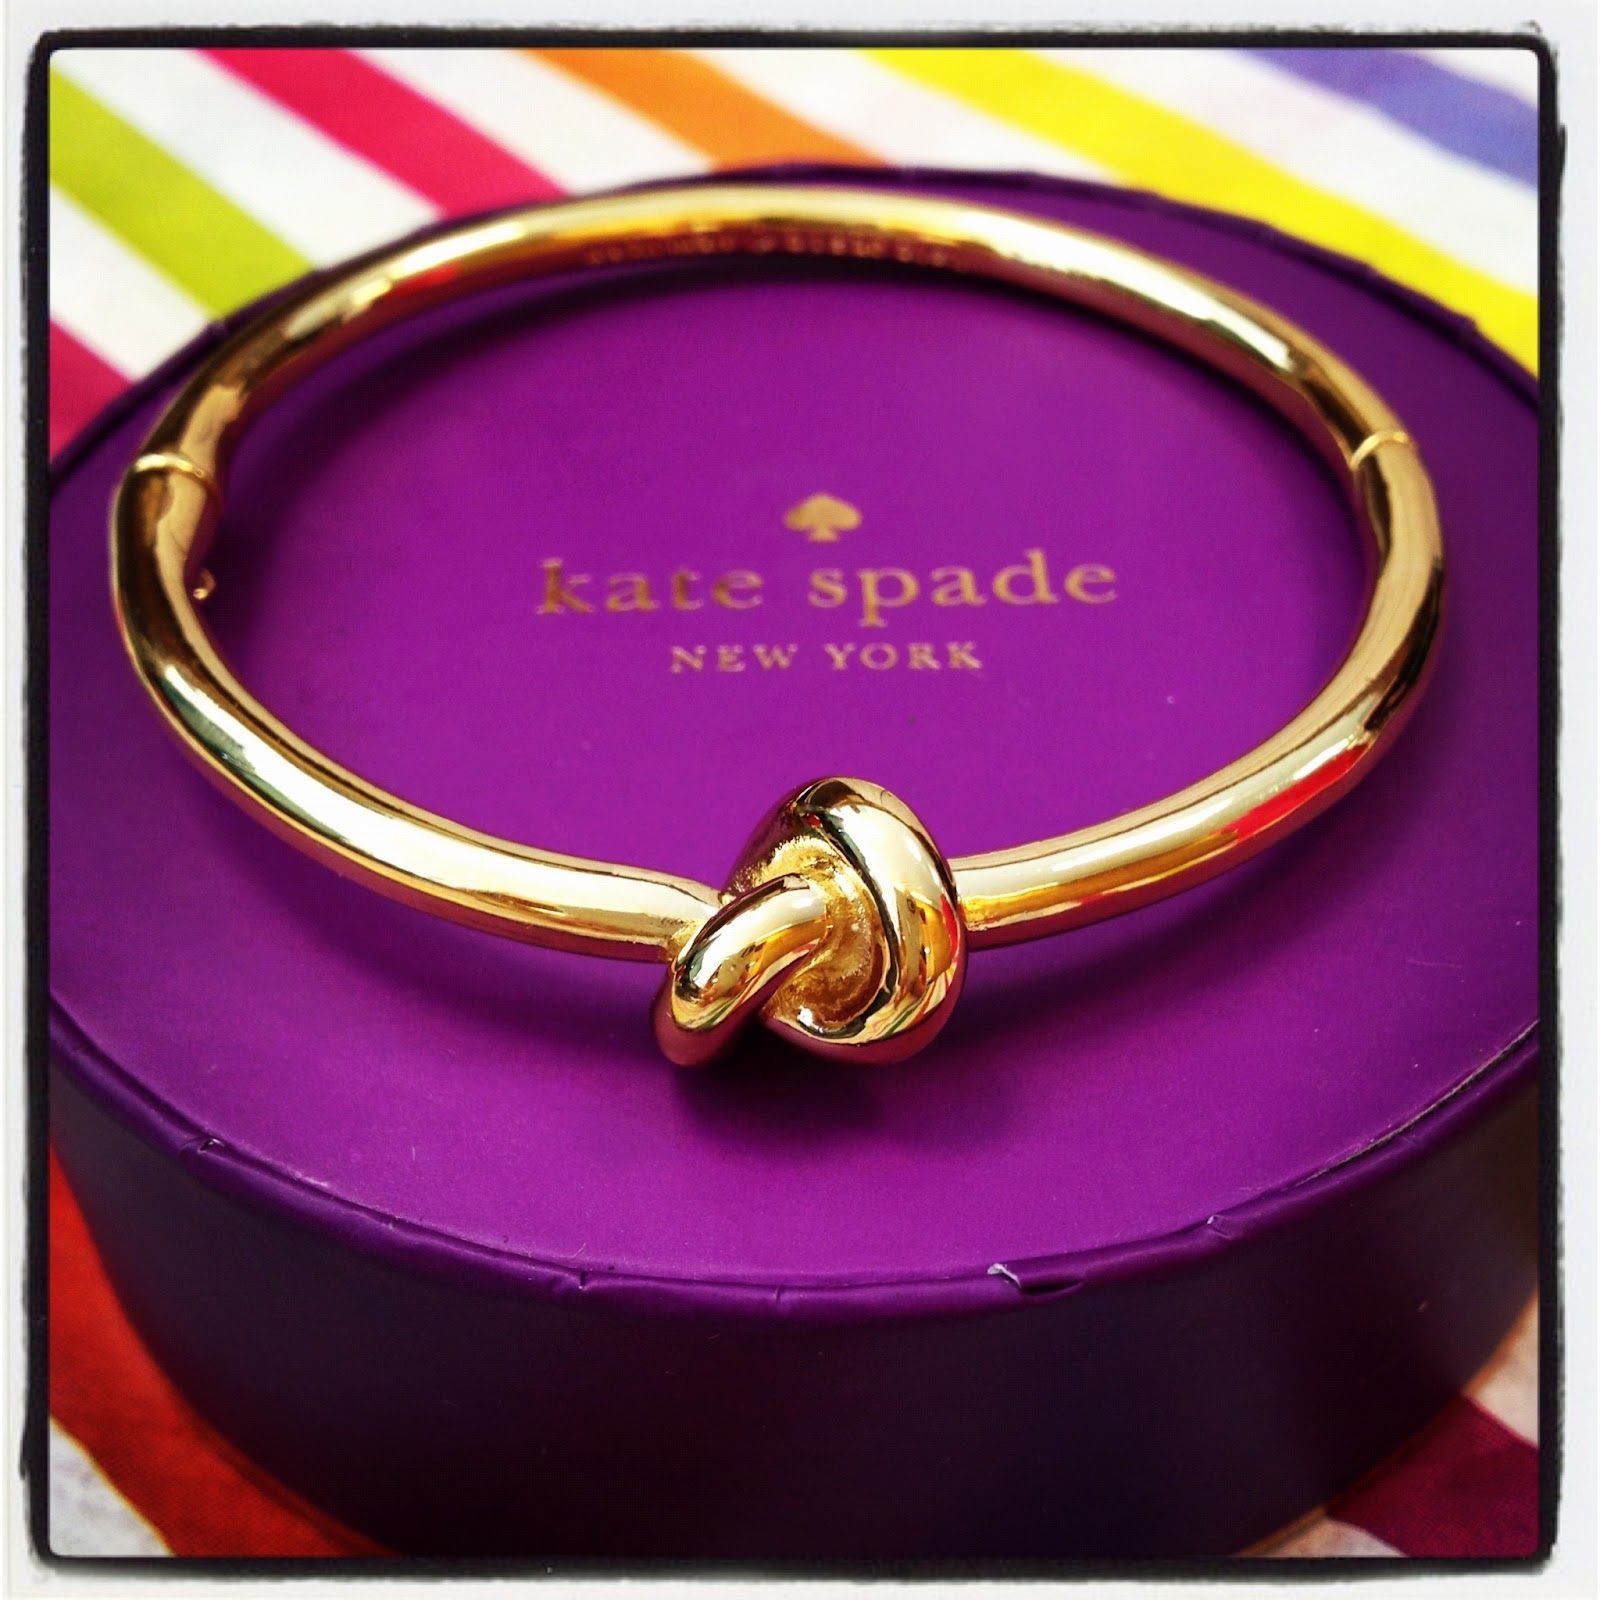 kate spade – tying the knot..adorable bridesmaid gift! "Thanks for helping